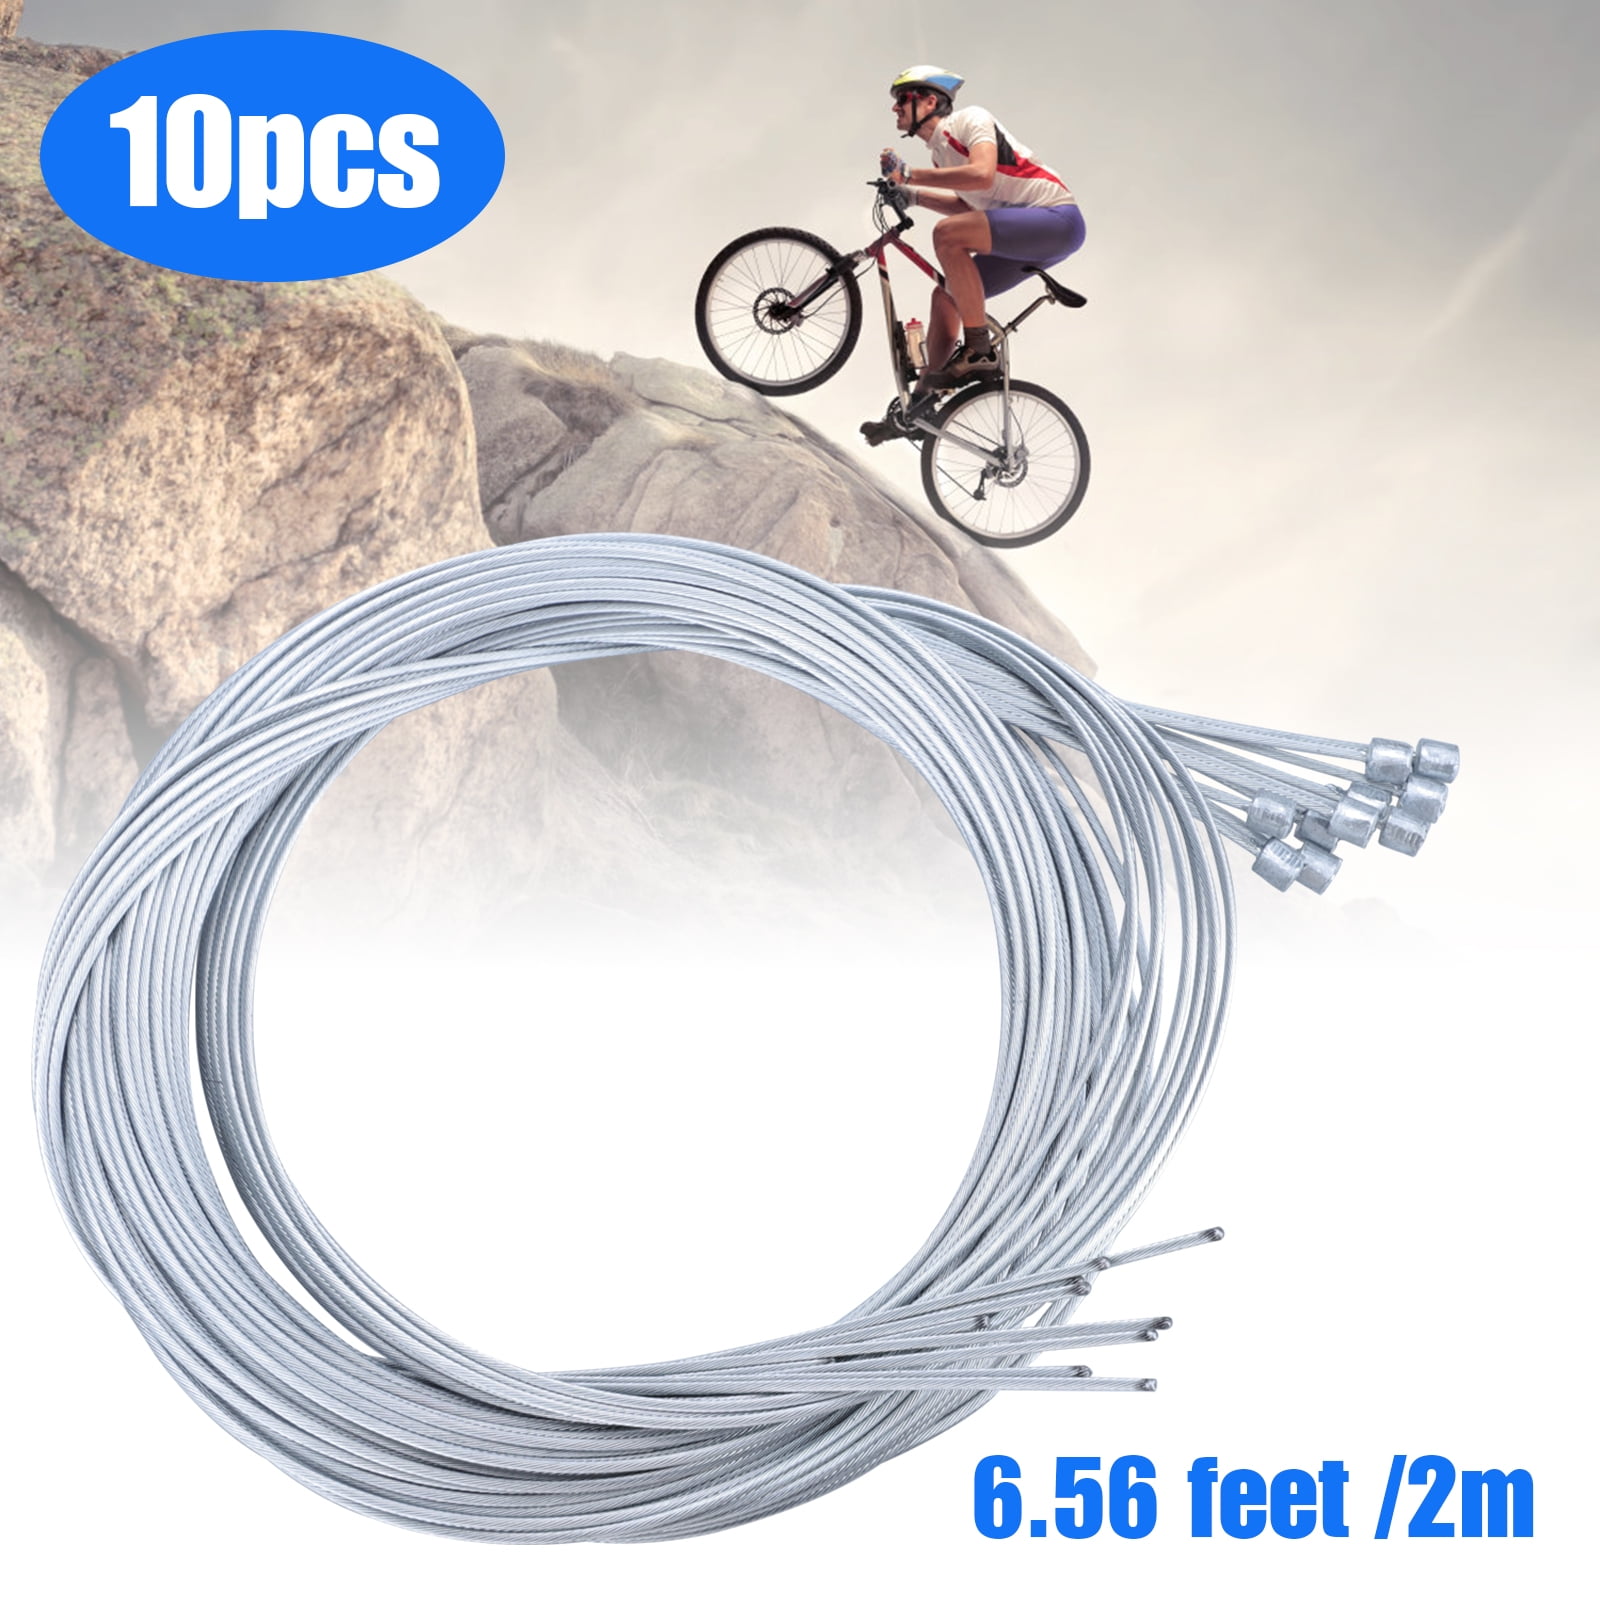 10PCS Racing Bicycle Bike Stainless Steel Shift Cables Derailleur Gear Wire 